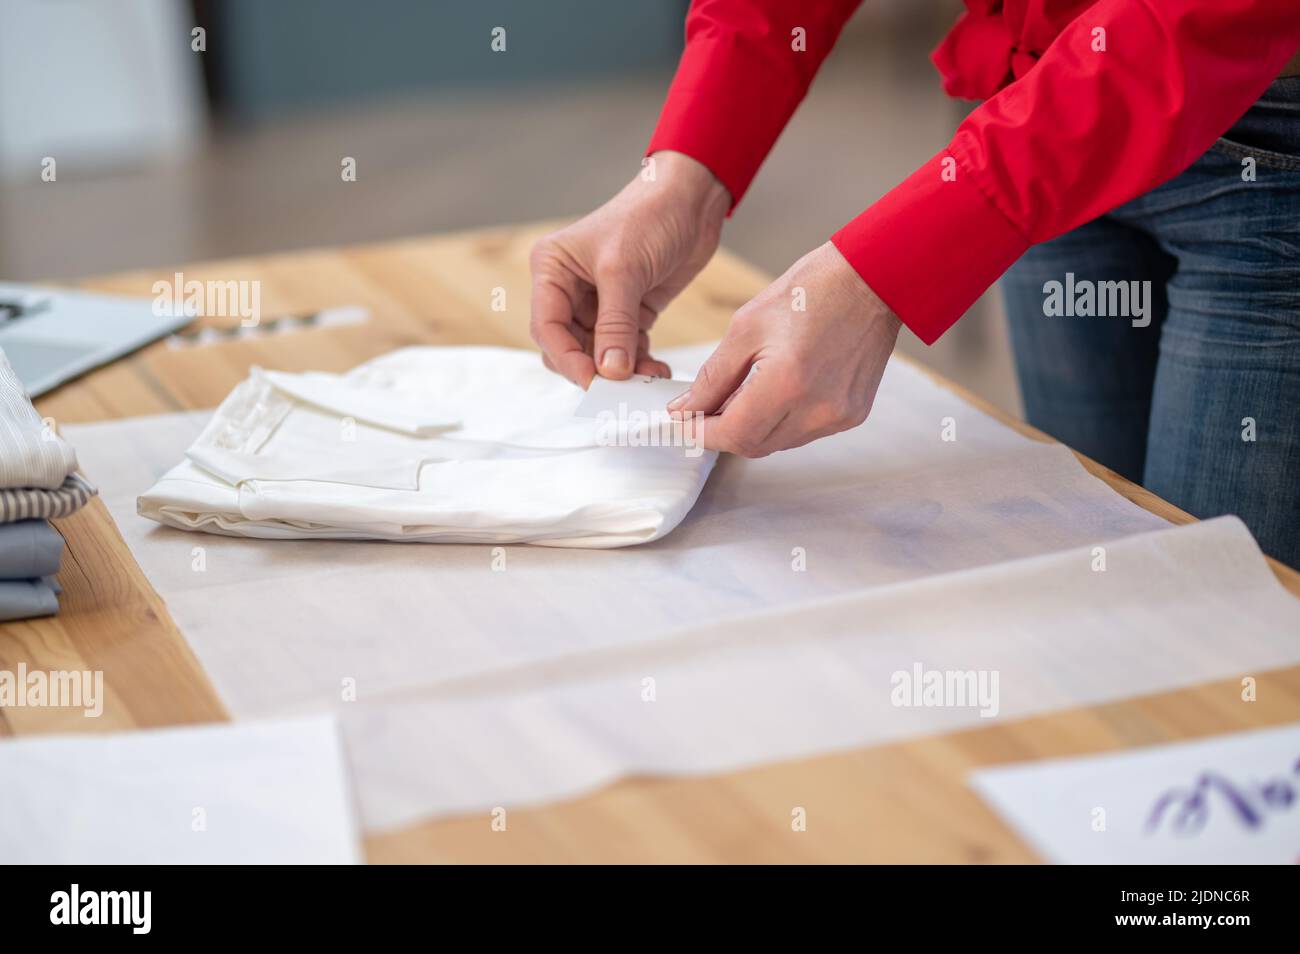 Hands touching folded clothes on surface of table Stock Photo